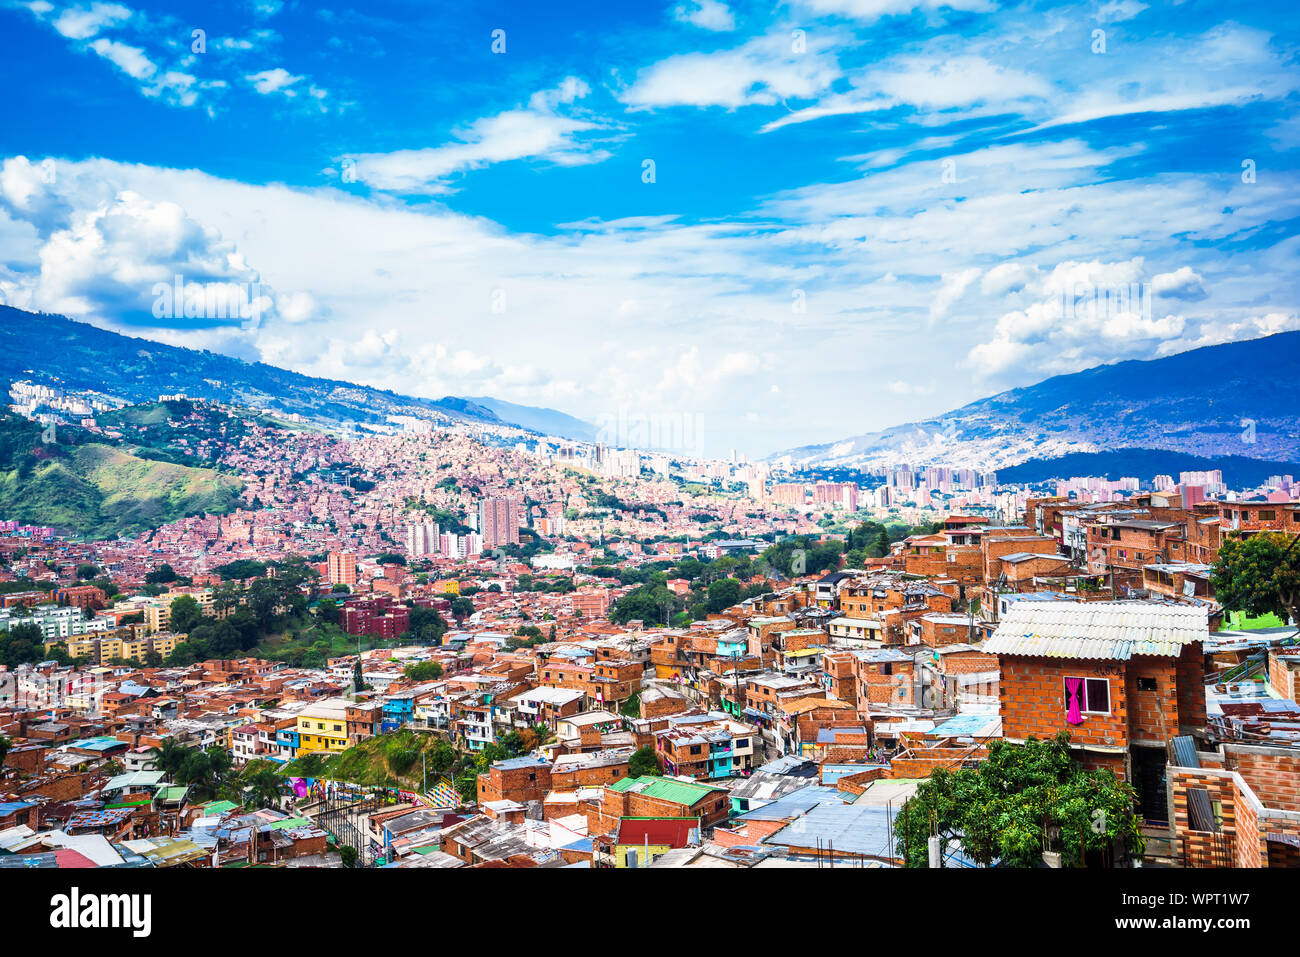 view over buildings of Comuna 13 in Medellin, Colombia Stock Photo